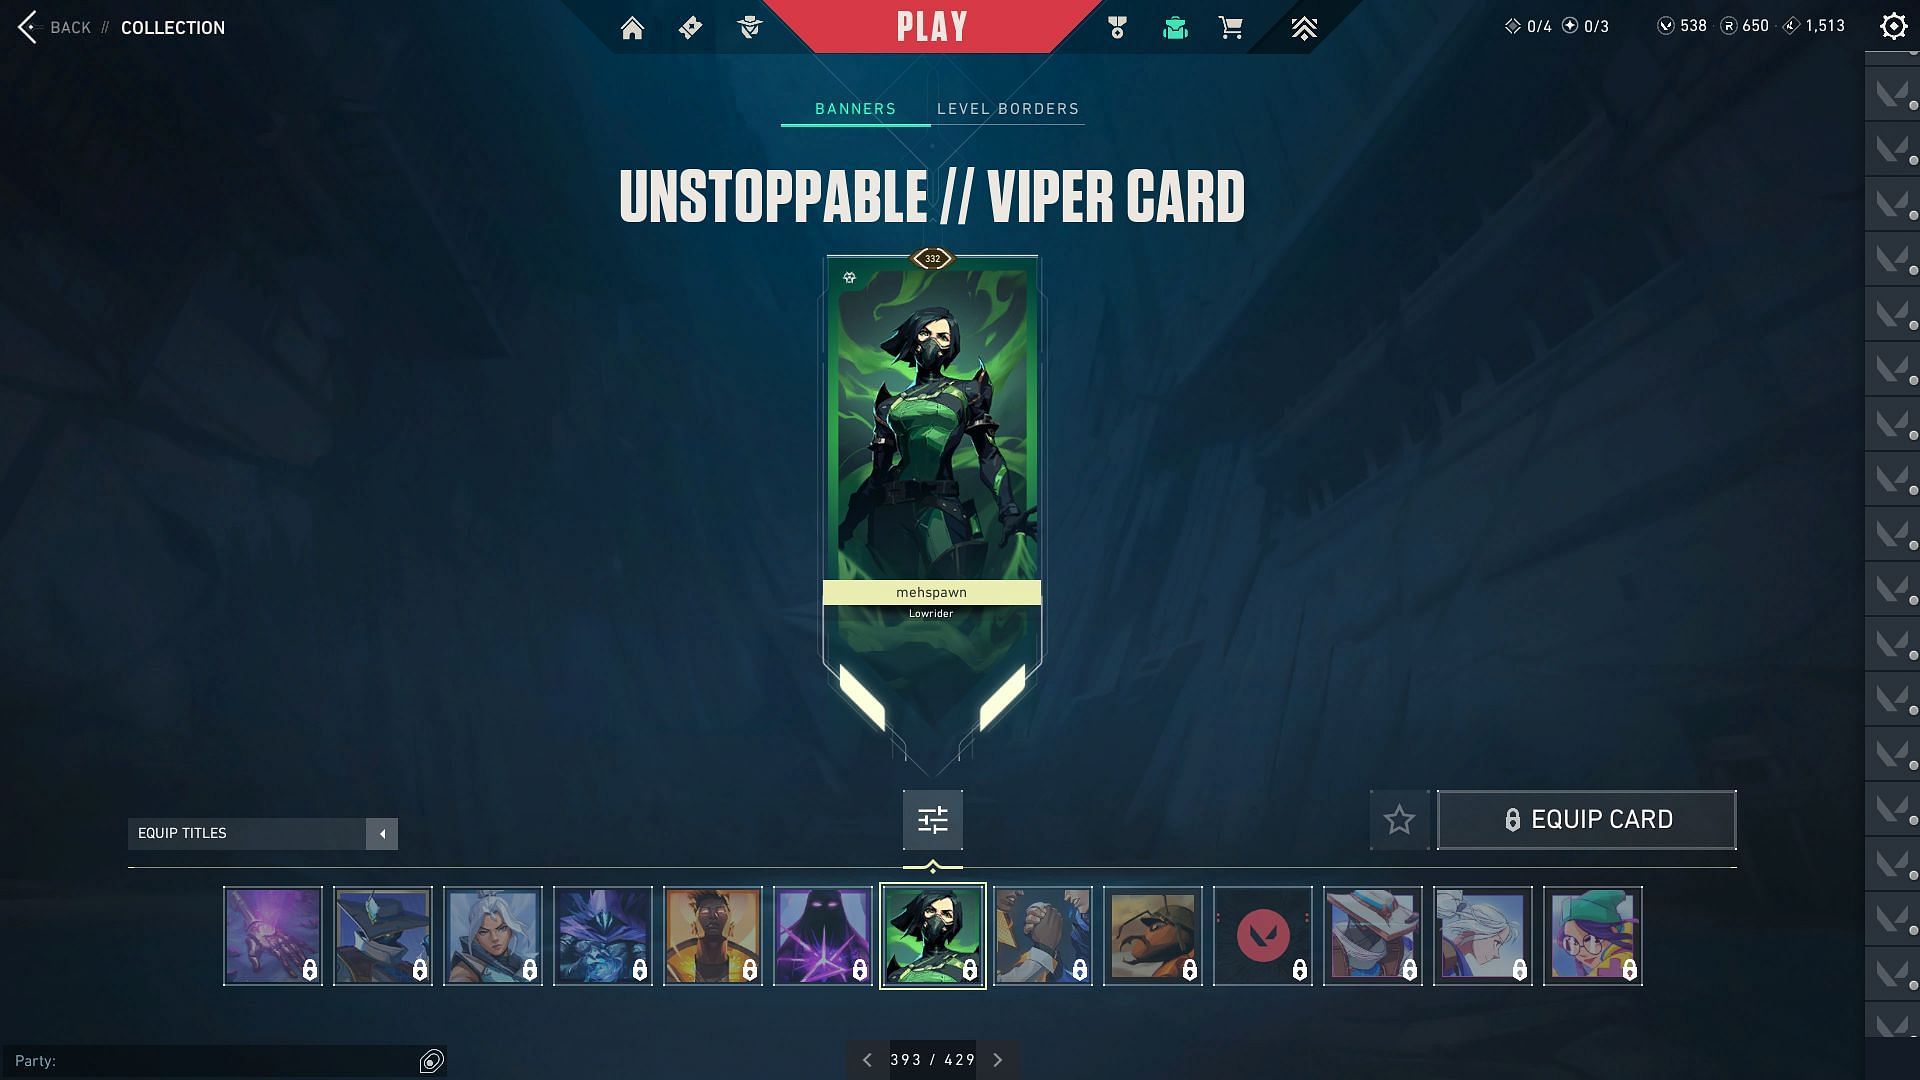 Unstoppable Player Card for Viper (Image via Riot Games)